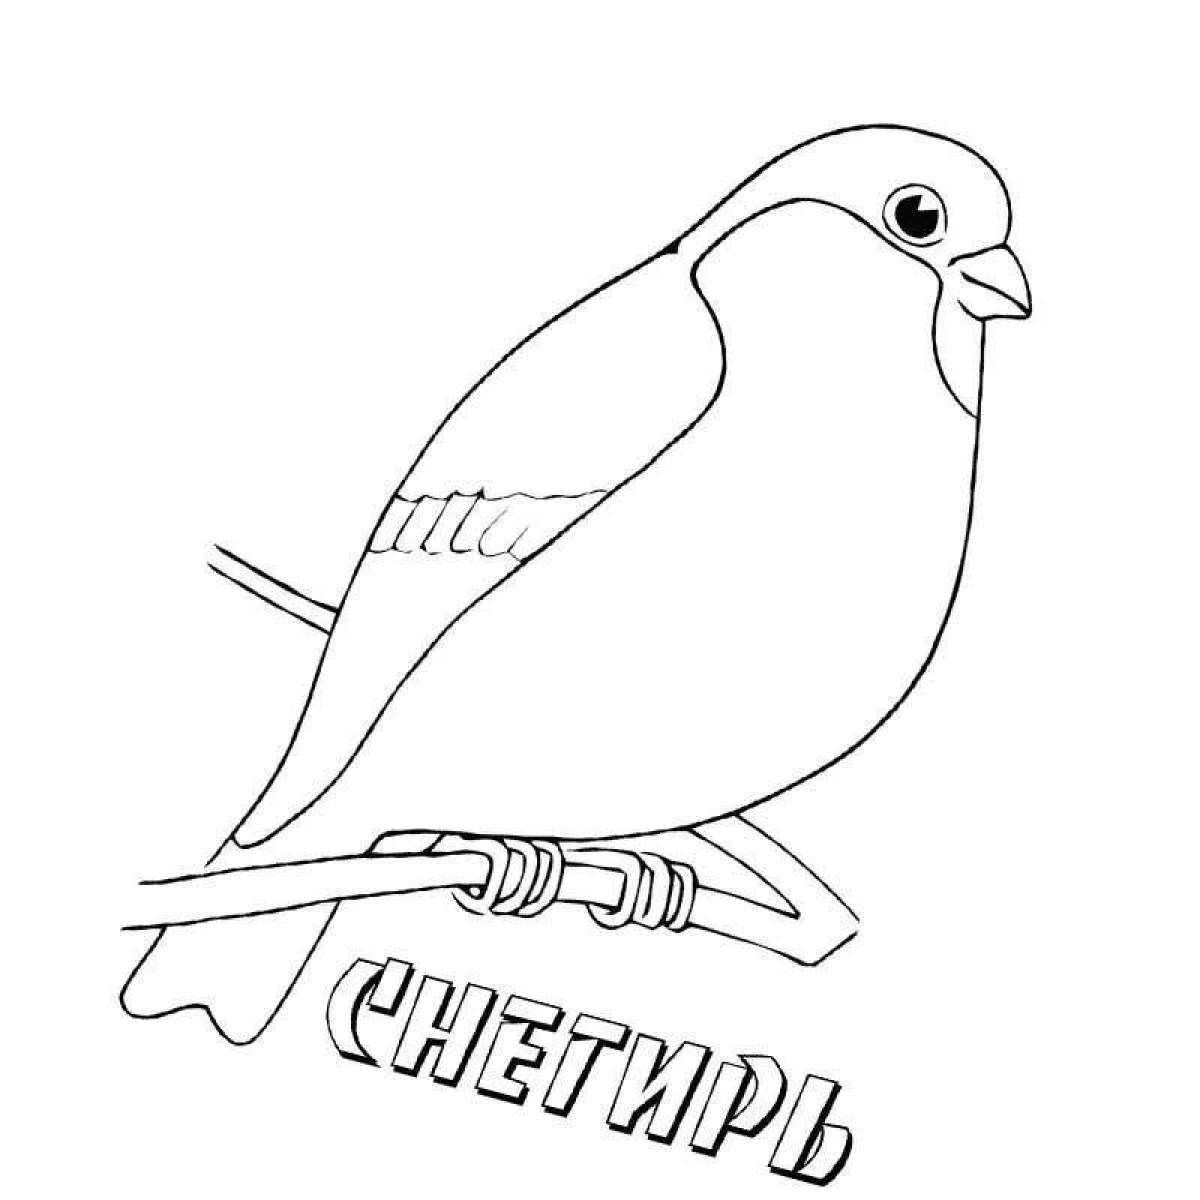 Exquisite bullfinch coloring book for 4-5 year olds